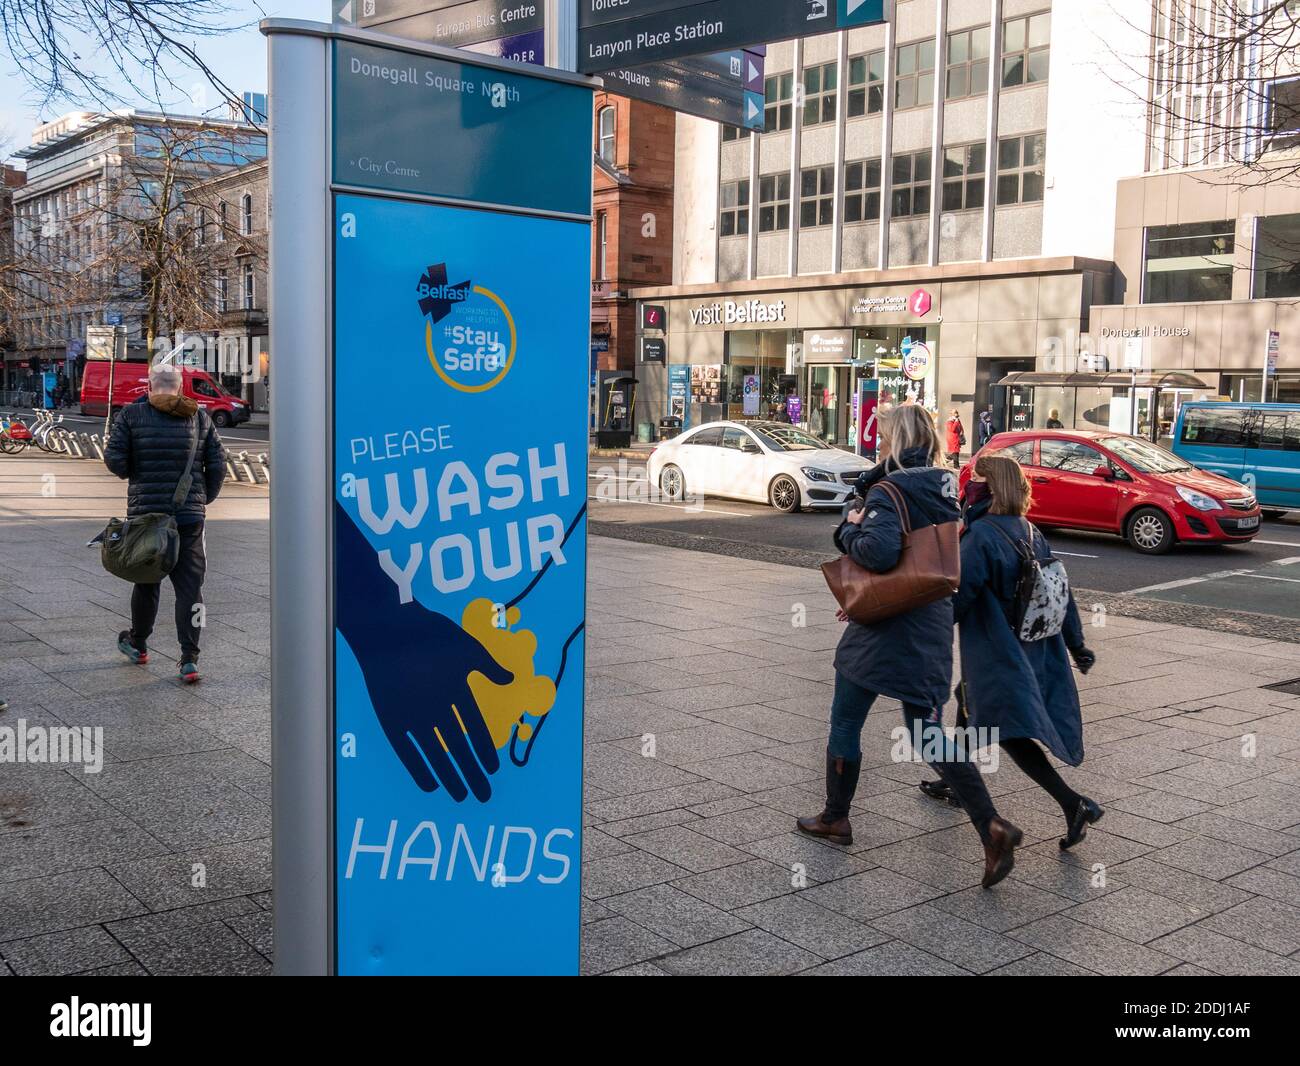 Belfast, Northern Ireland, UK, 25 November 2020: People walk past a sign in Donegall Square North reminding the public  to Wash Your Hands Stock Photo